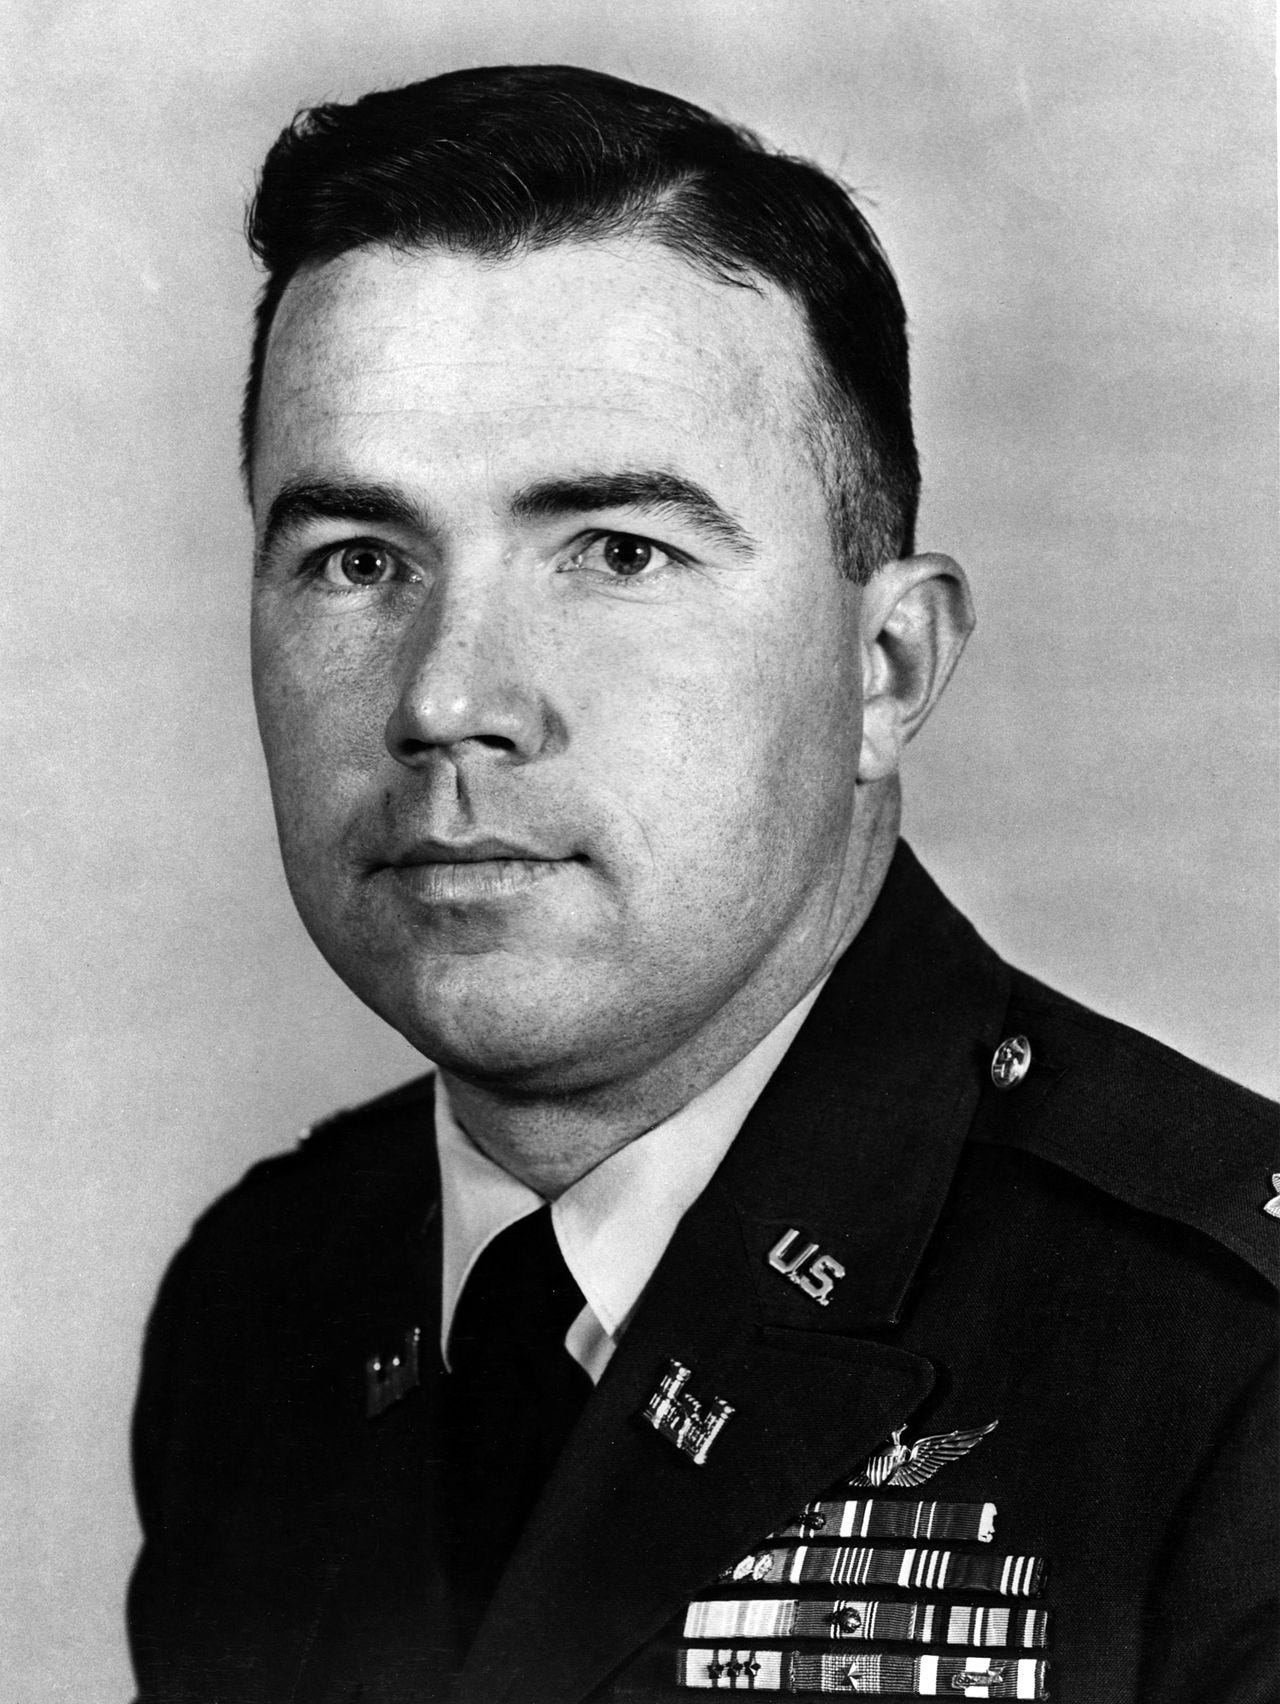 Headshot of a young Crandall, in uniform.